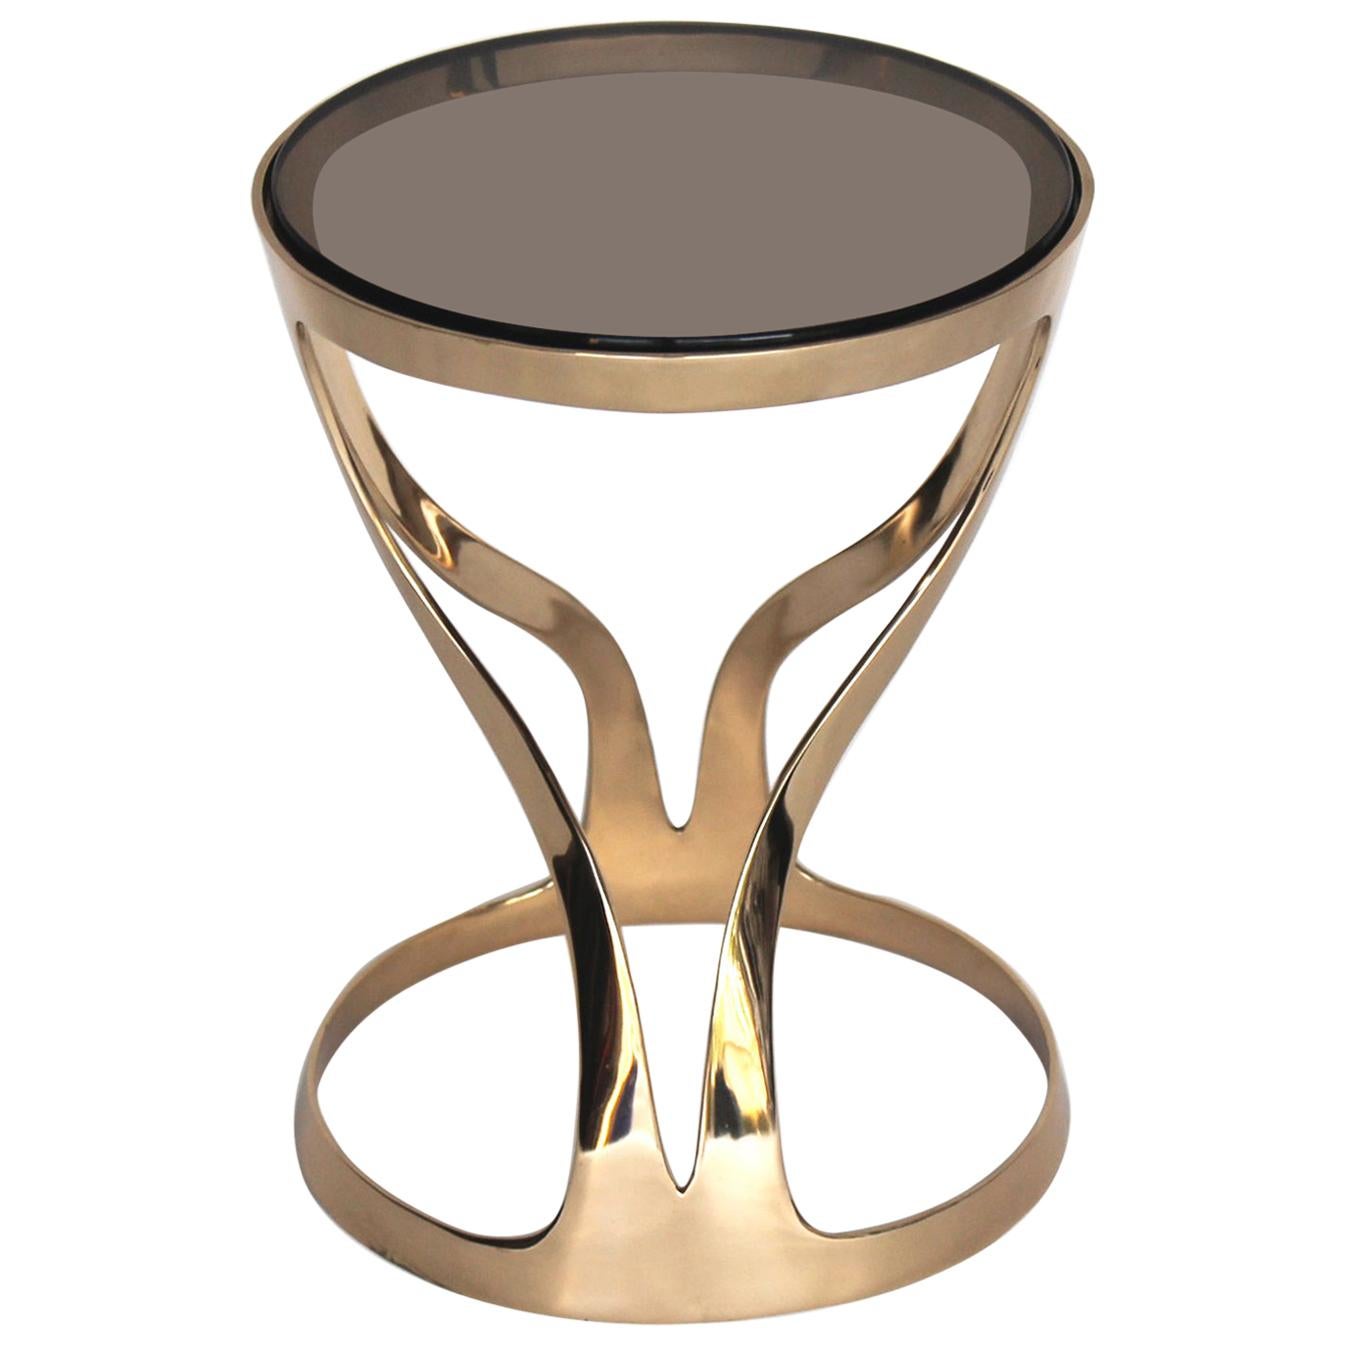 Lyra Table - Polished Bronze & Smoked Glass - Design by Michael Sean Stolworthy For Sale